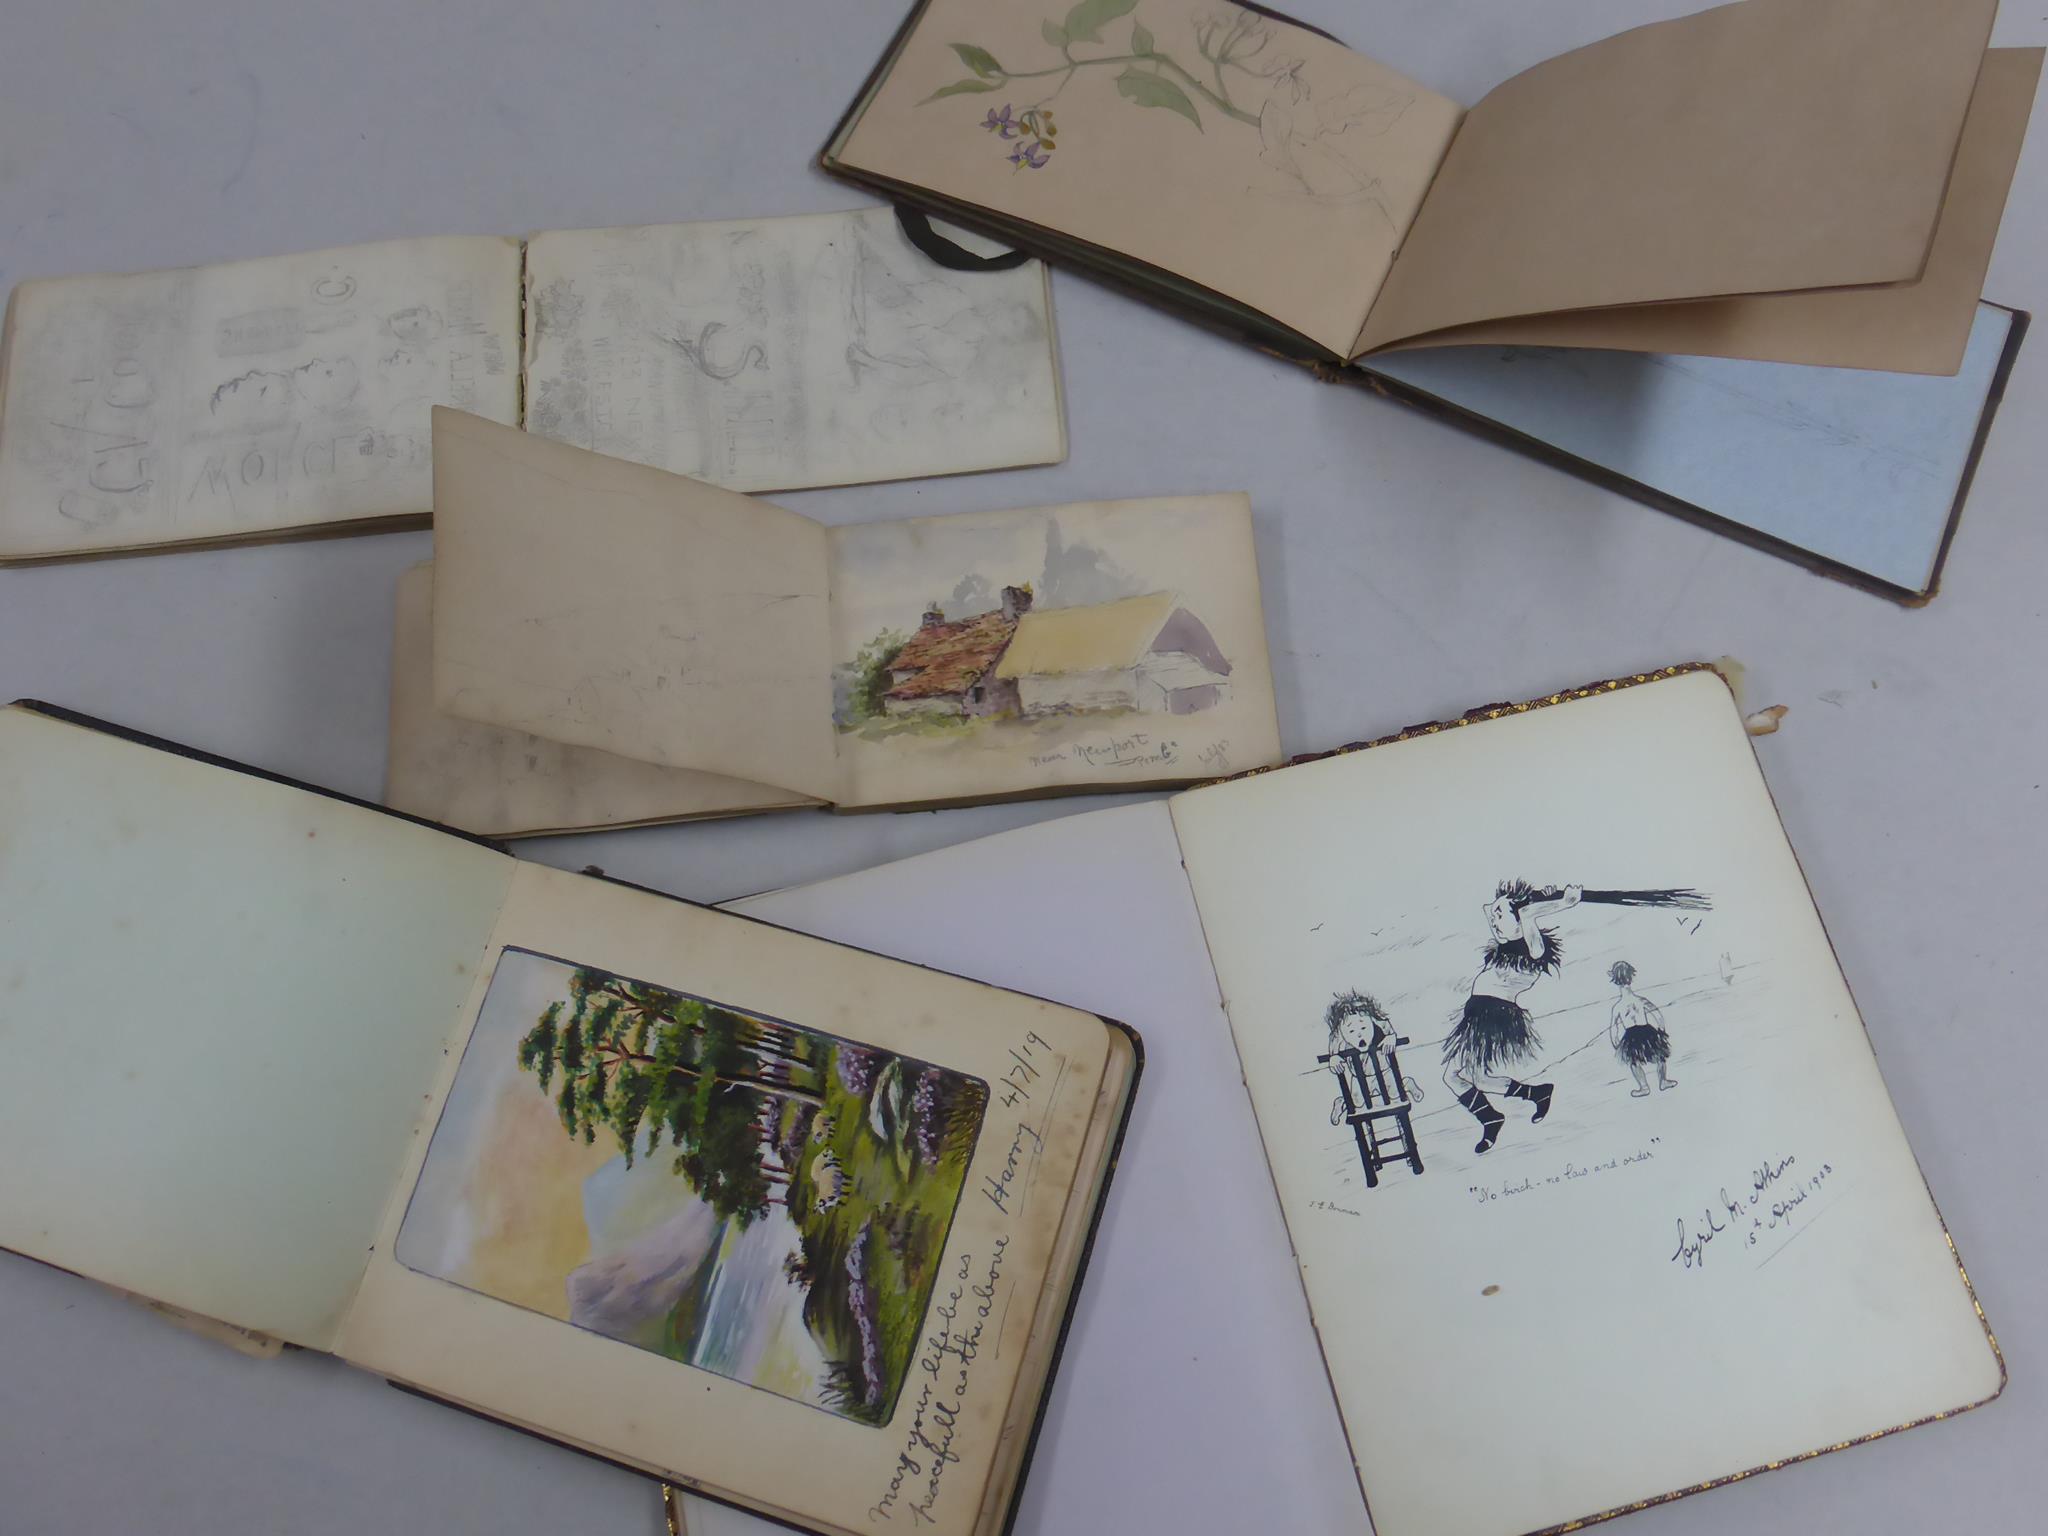 MISC. SKETCH BOOKS AND AUTOGRAPH BOOKS DATING FROM WWI ERA - Image 2 of 5